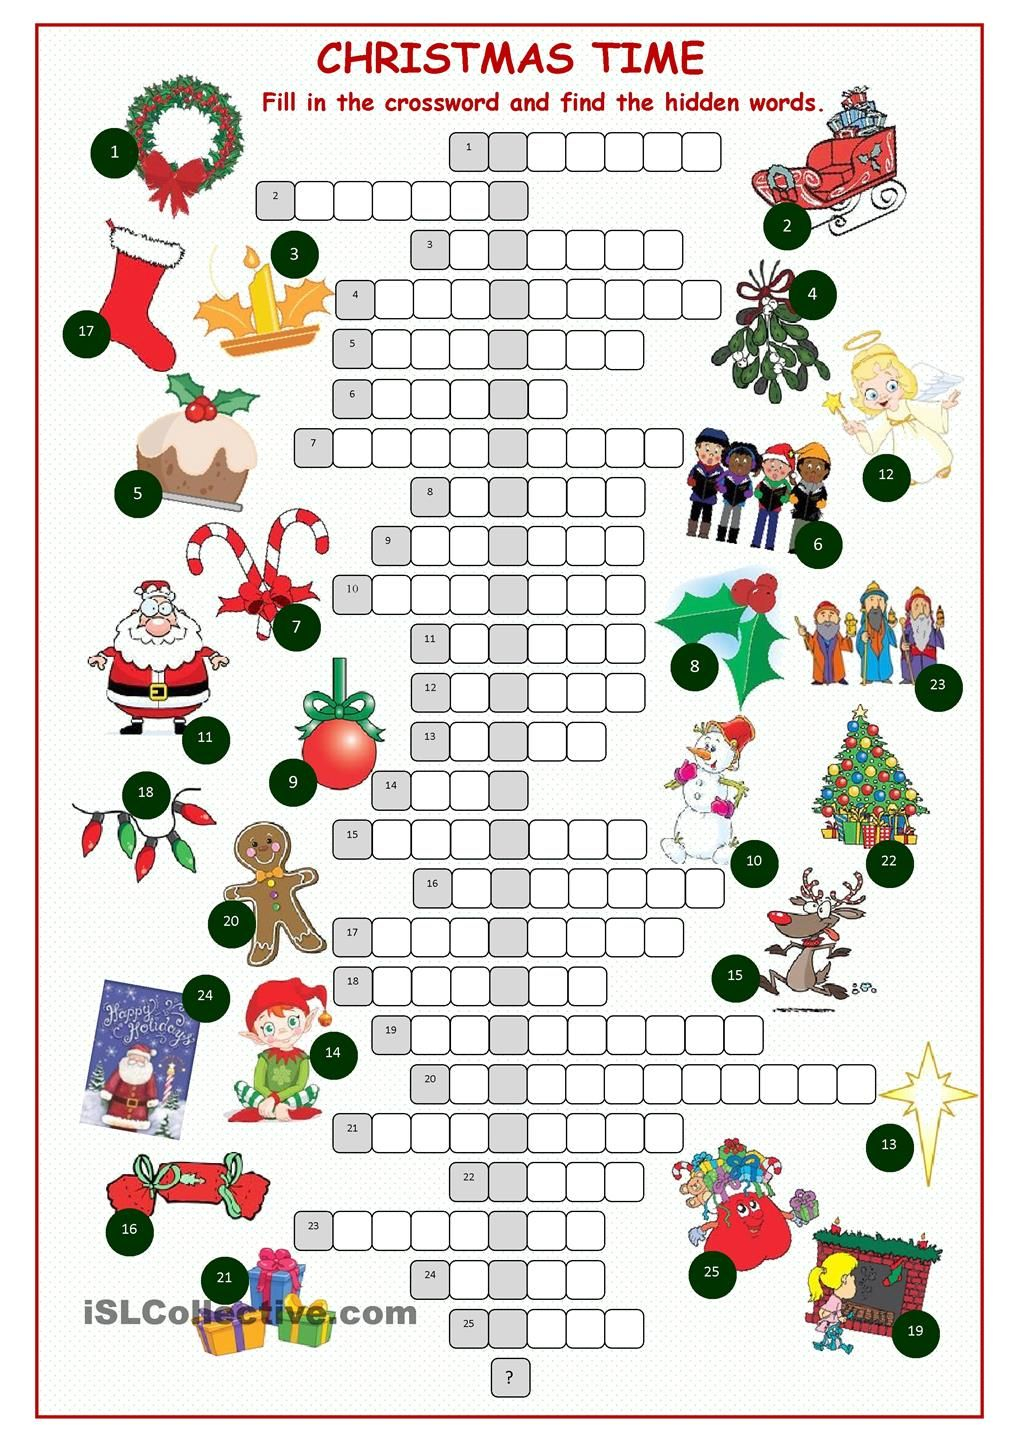 Christnas Time Crossword Puzzle | Christmas Worksheets